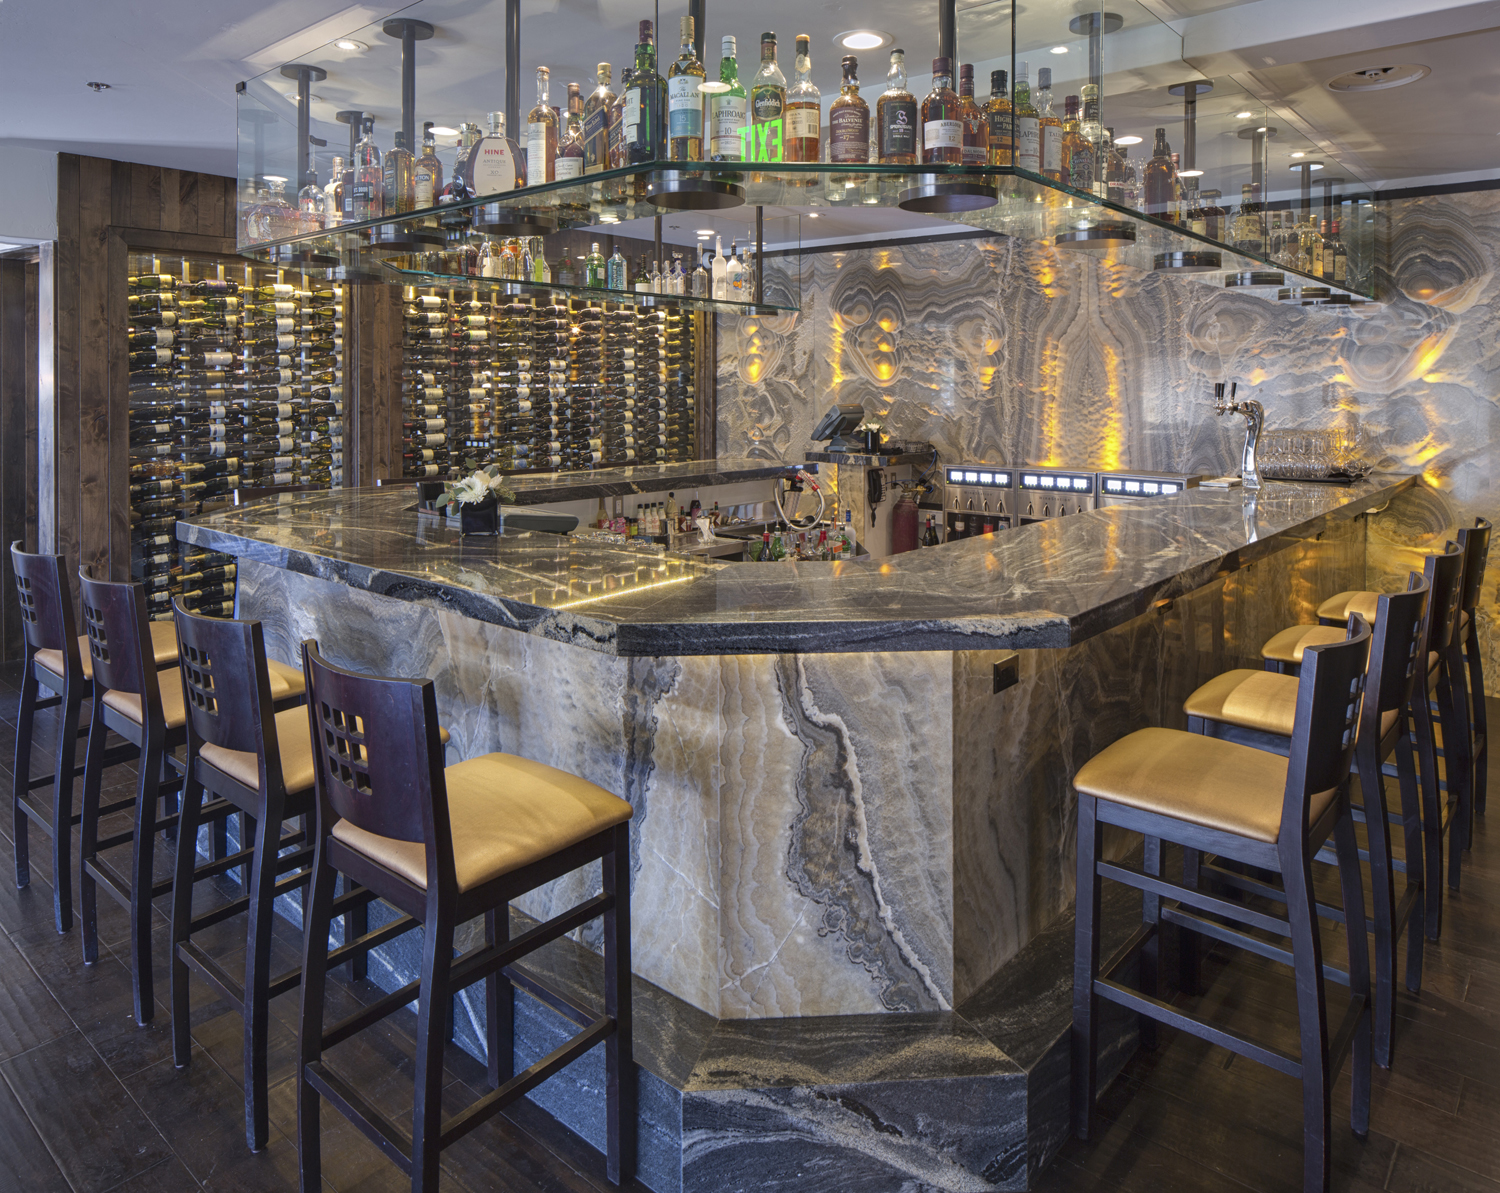 Jimmy’s elegant onyx-backed bar and an exceptional wine list, revealed in a custom glass-fronted cellar, are favorites with locals who voted Jimmy's a "Best of Tahoe" winner.